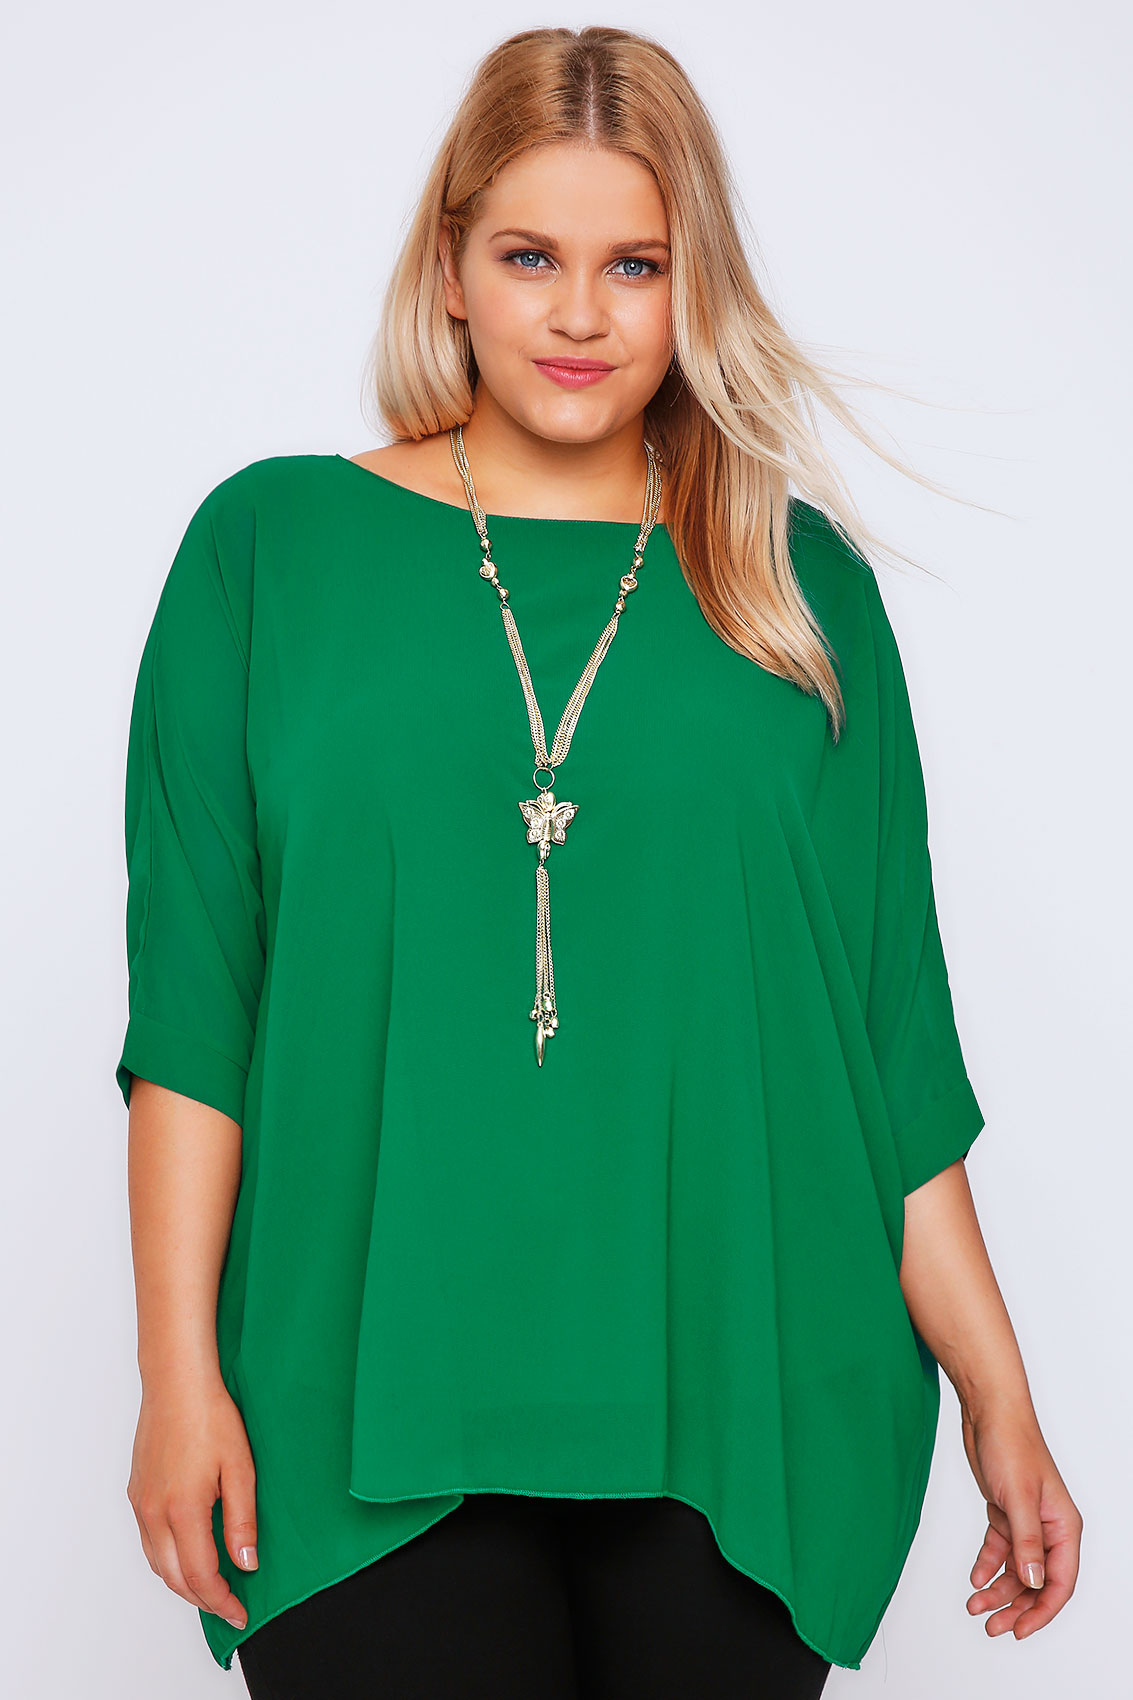 Green Batwing Sleeve Chiffon Top With Necklace Plus Size 16 to 32